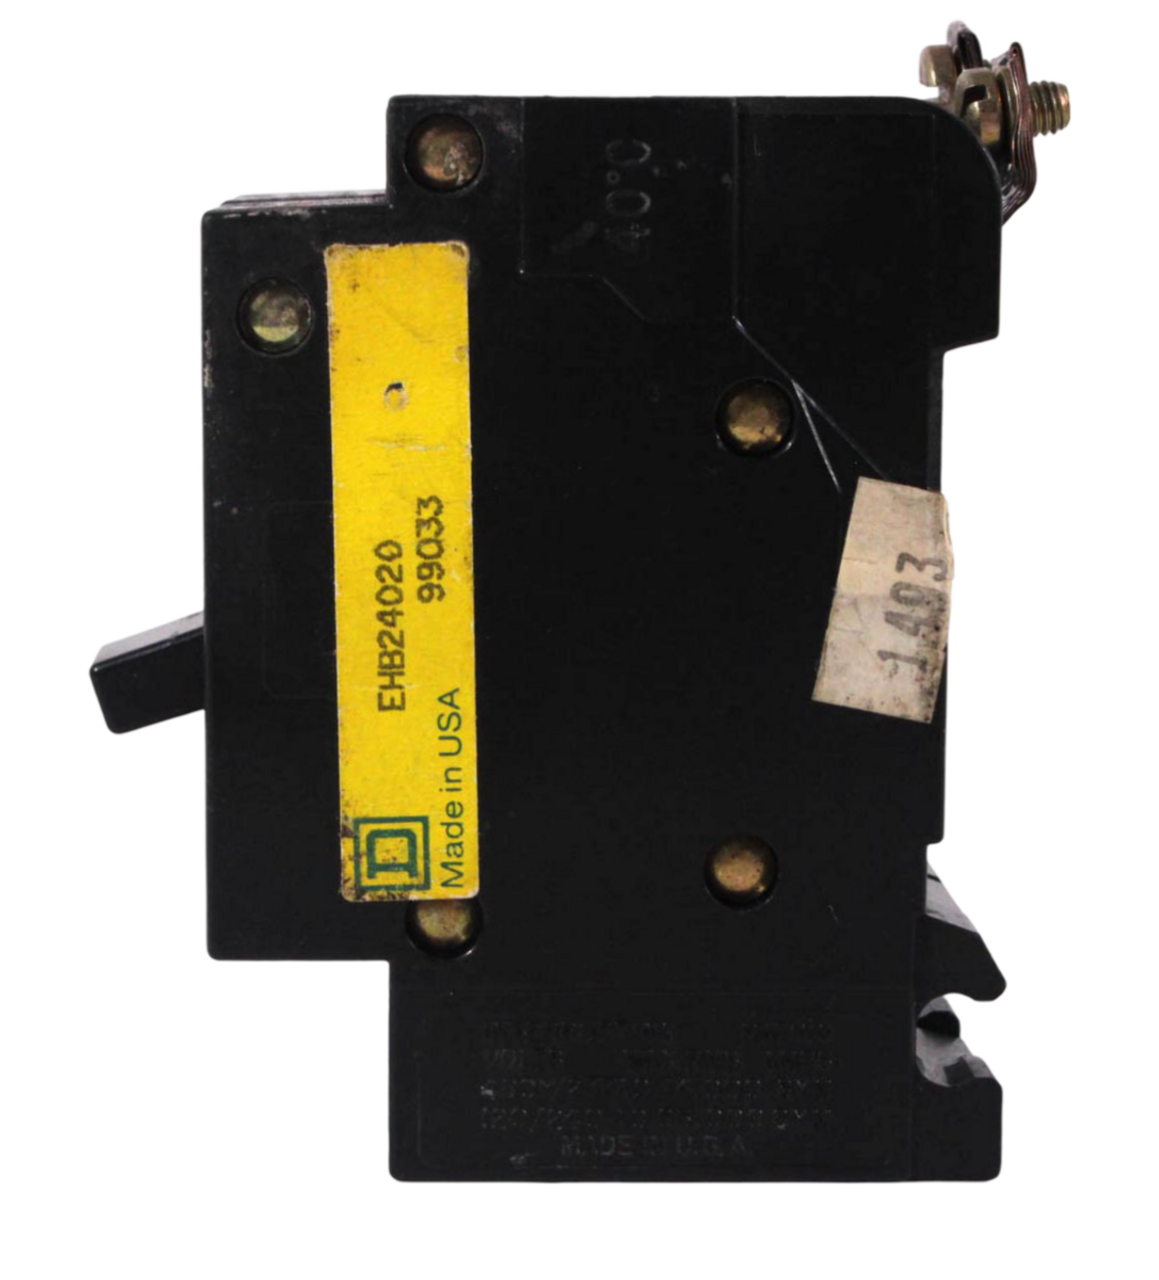 Square D EHB24020 Breaker 20A 480Y/277V 2P 1PH 14kA Bolt On LI Thermal Magnetic